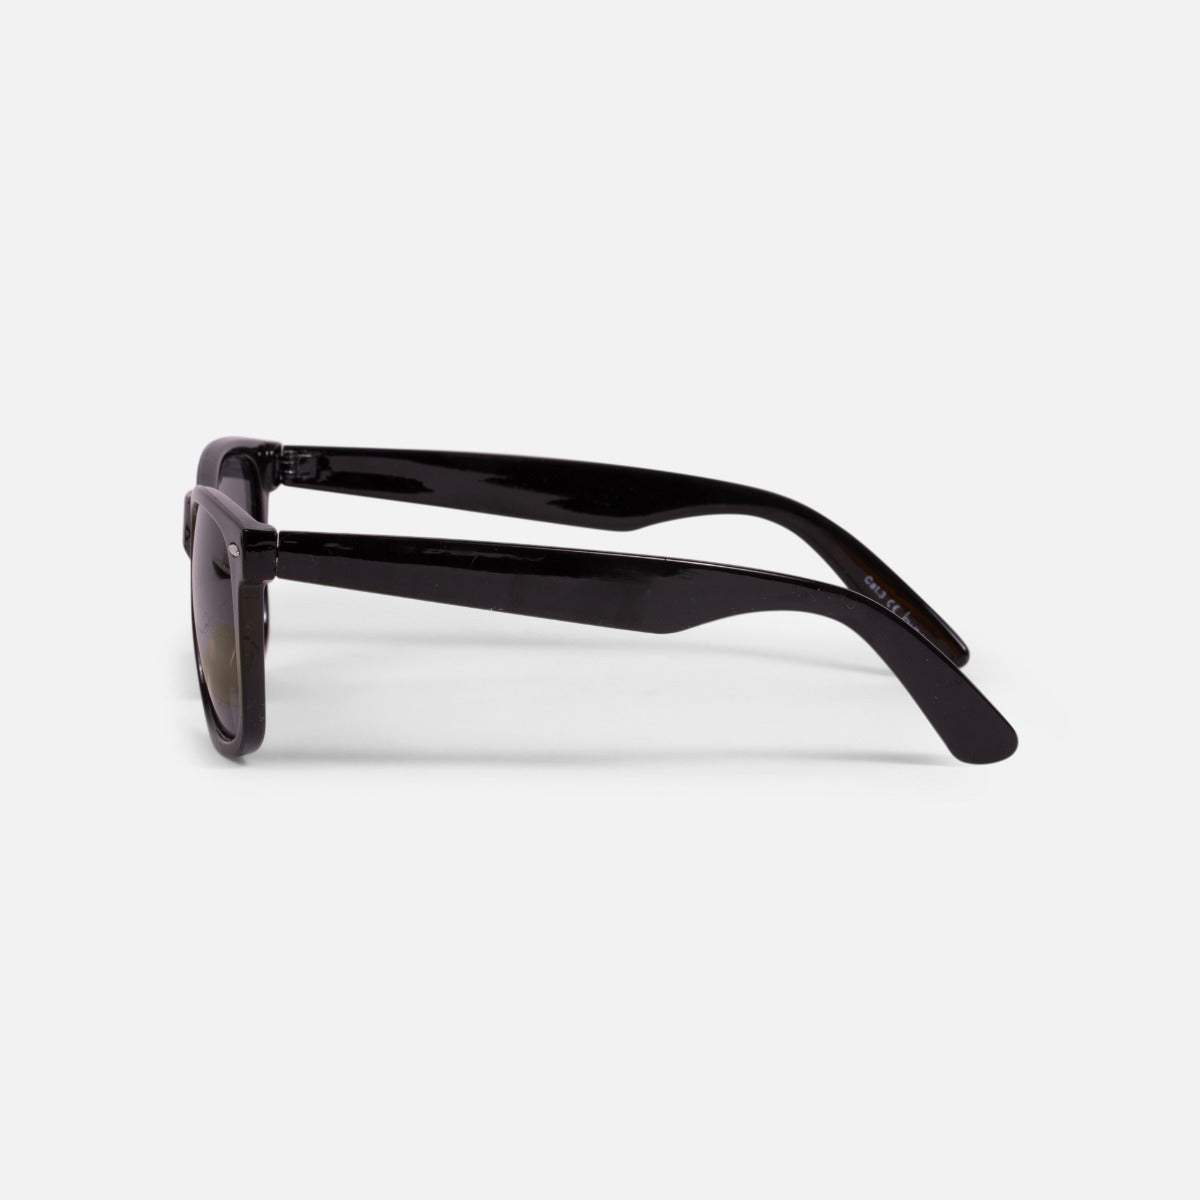 Classic black sunglasses with structured lenses